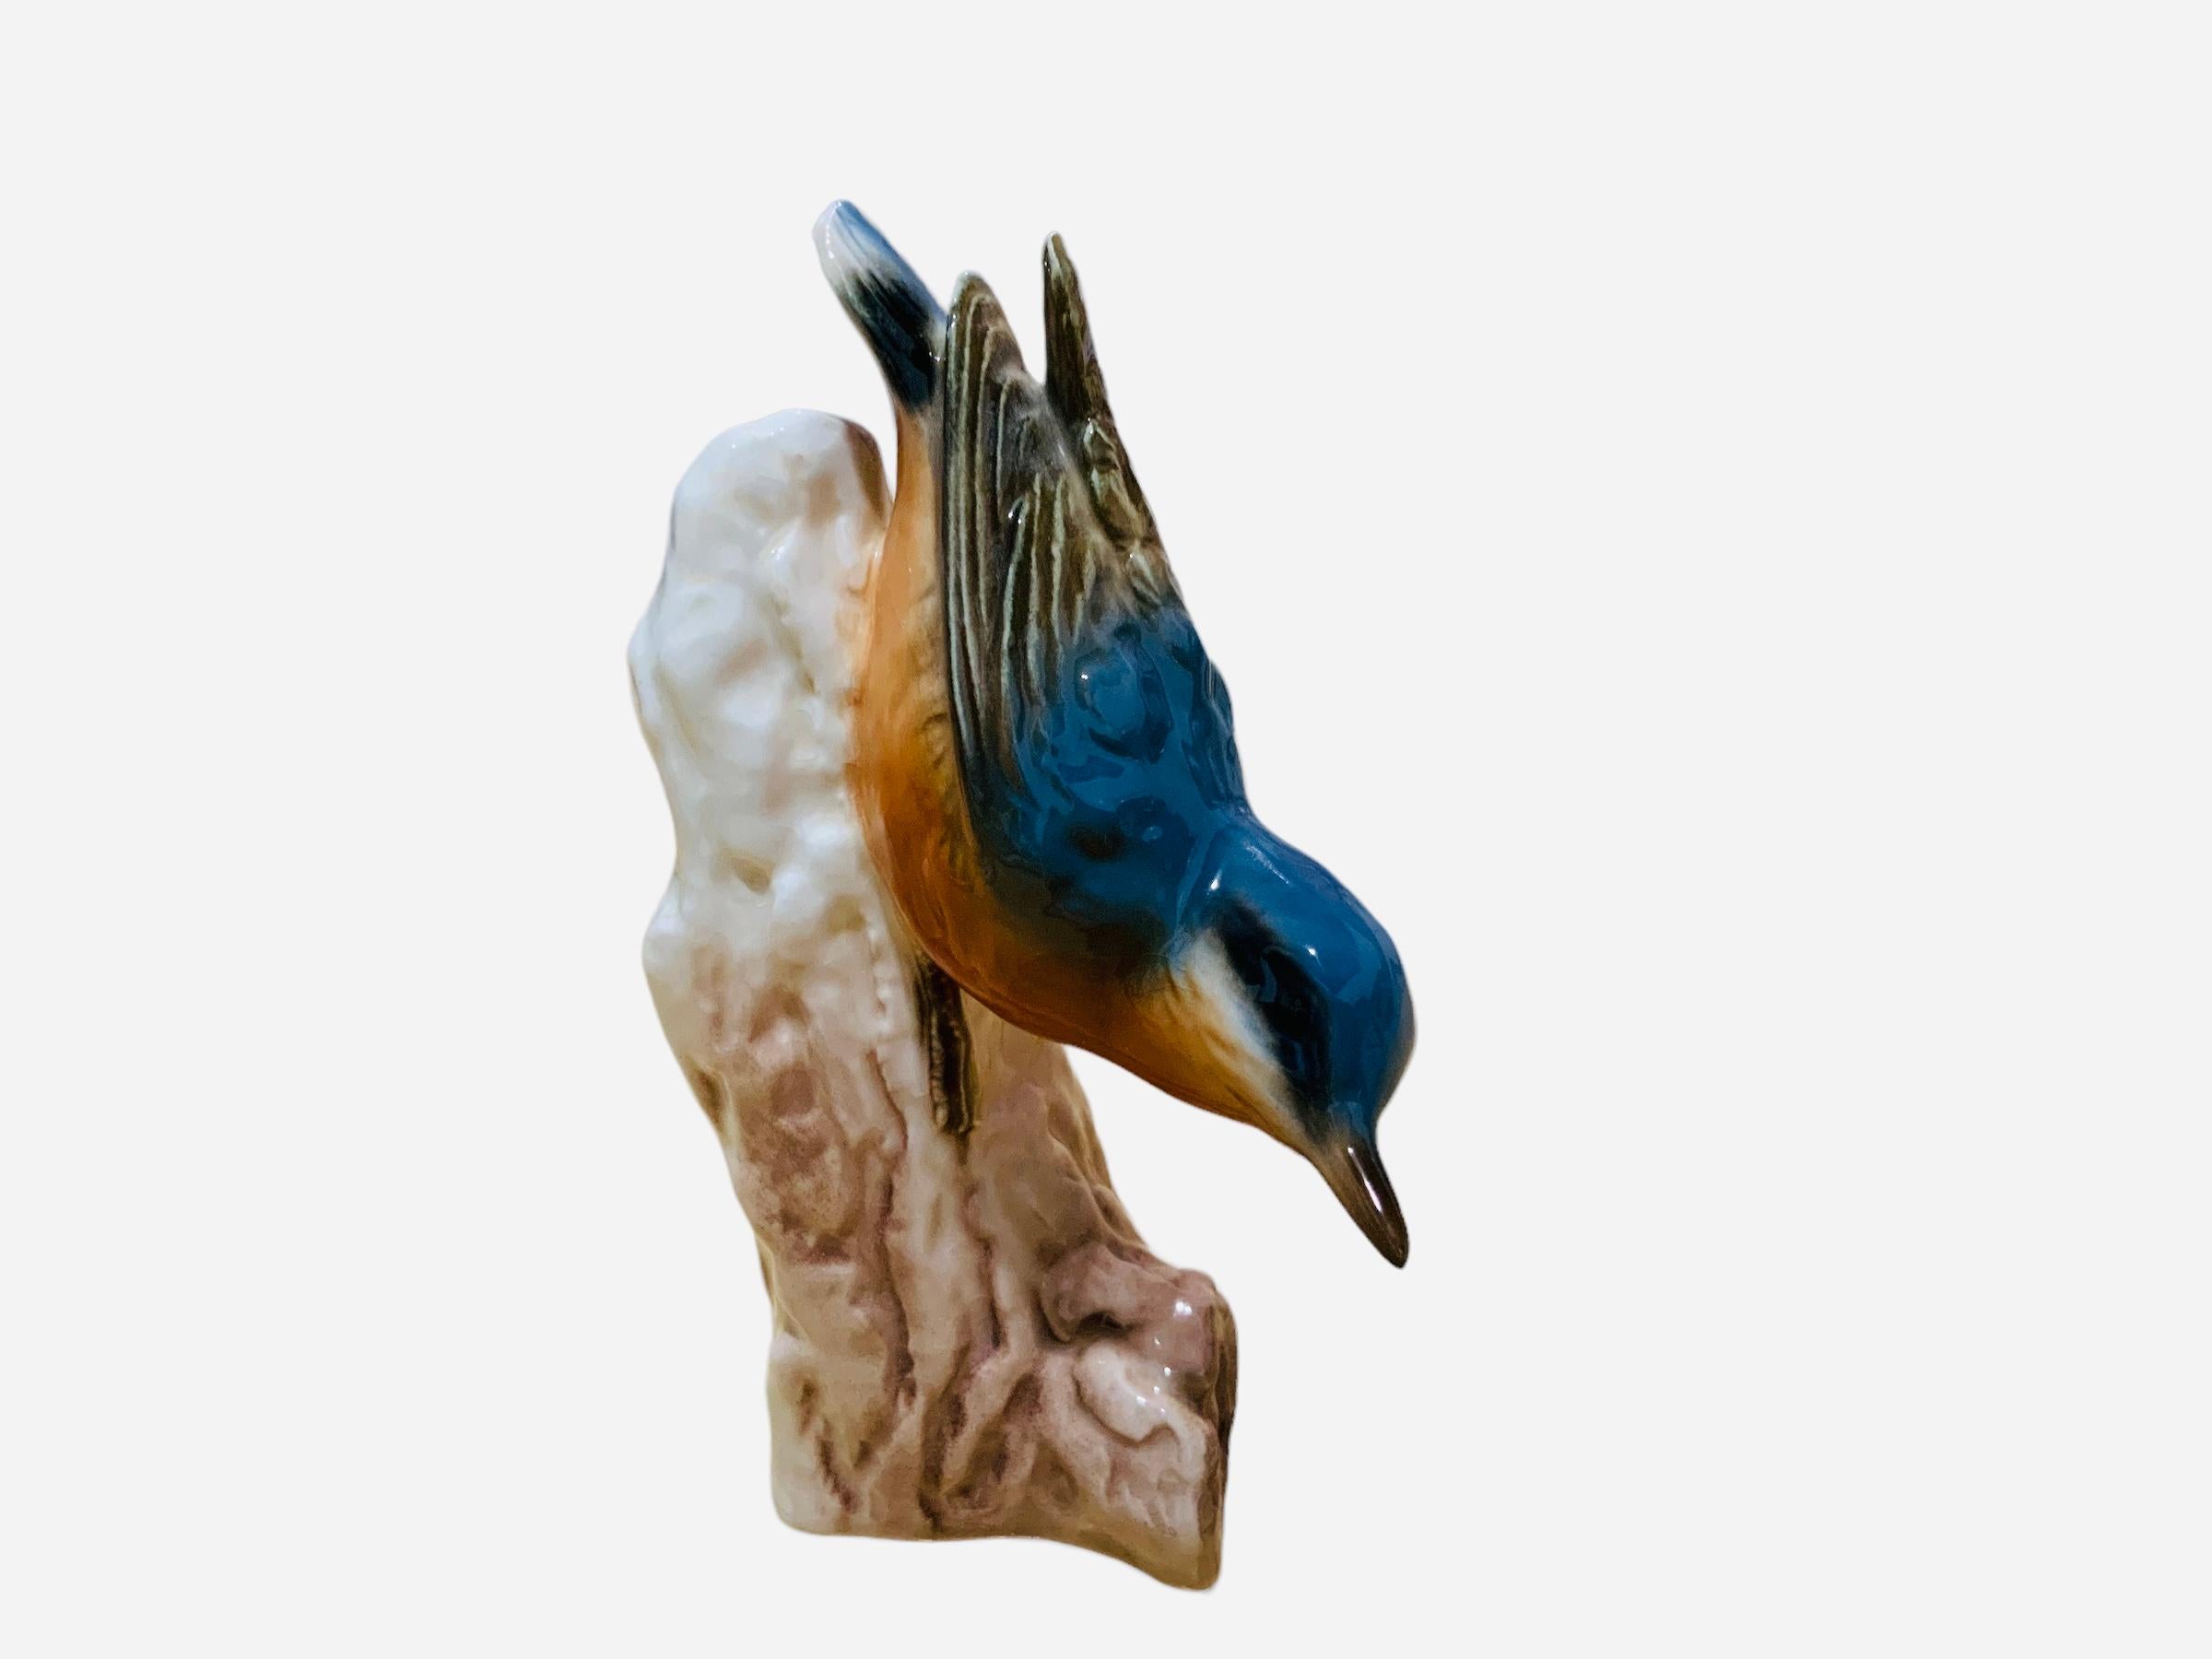 German Goebel Porcelain Hand Painted Bird Figurine of a Nuthatch For Sale